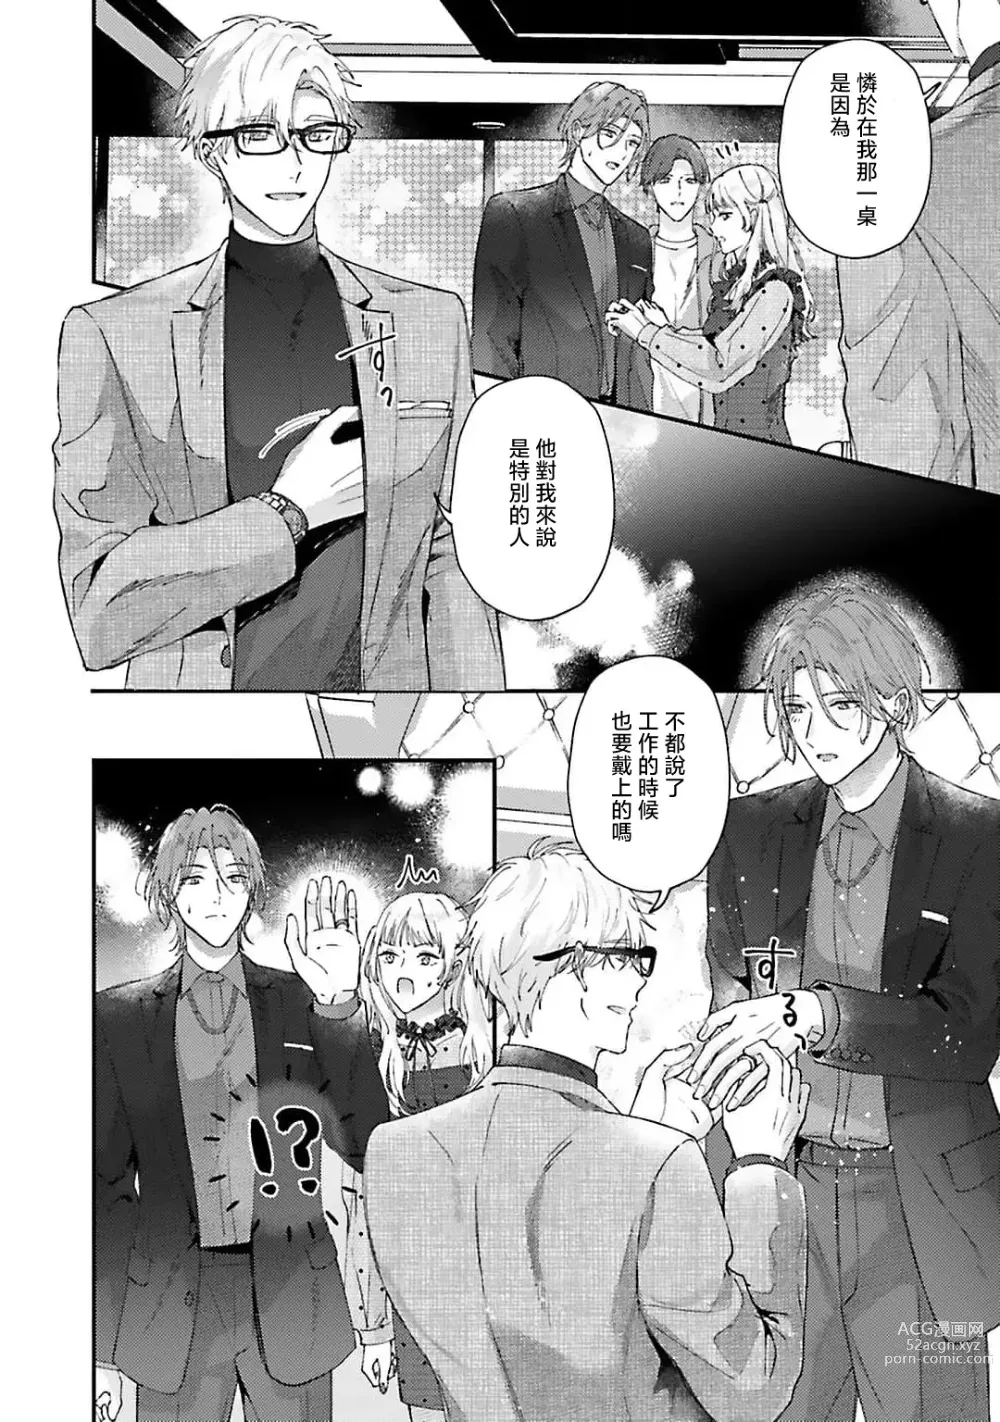 Page 24 of manga 开始当爸爸的两人 another 1